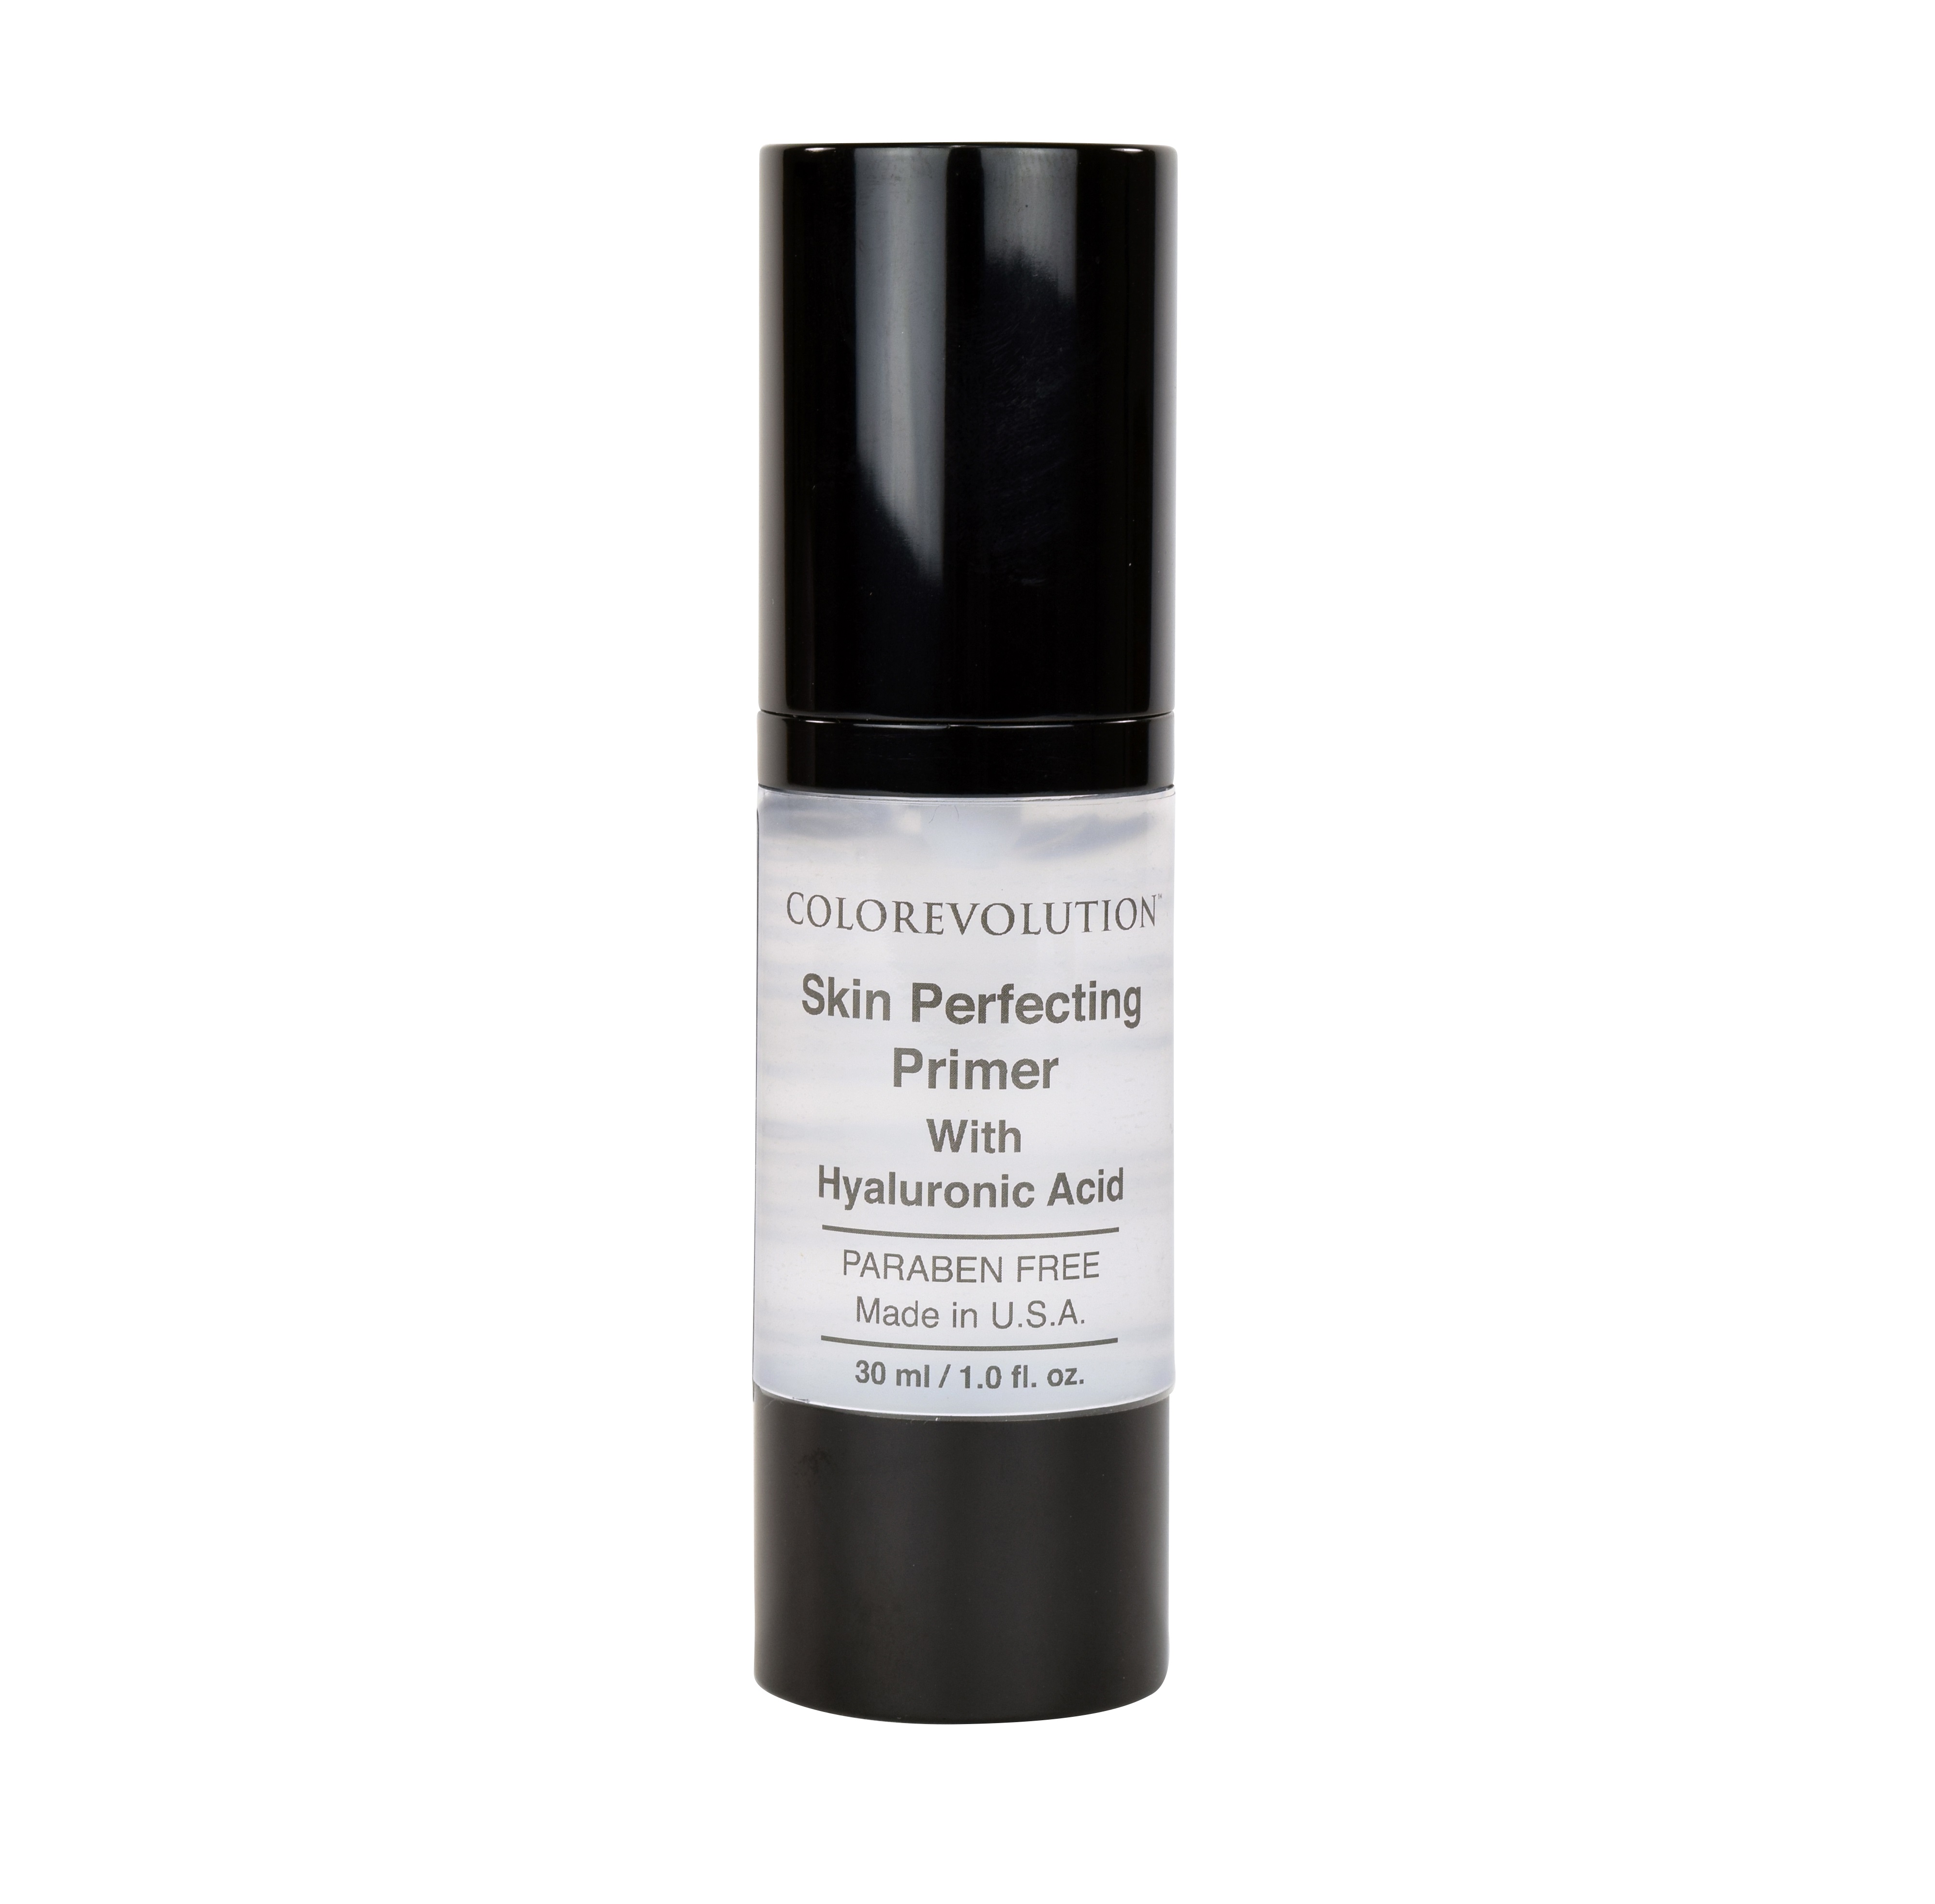 Colorevolution Clear Foundation Primer with Hyaluronic Acid